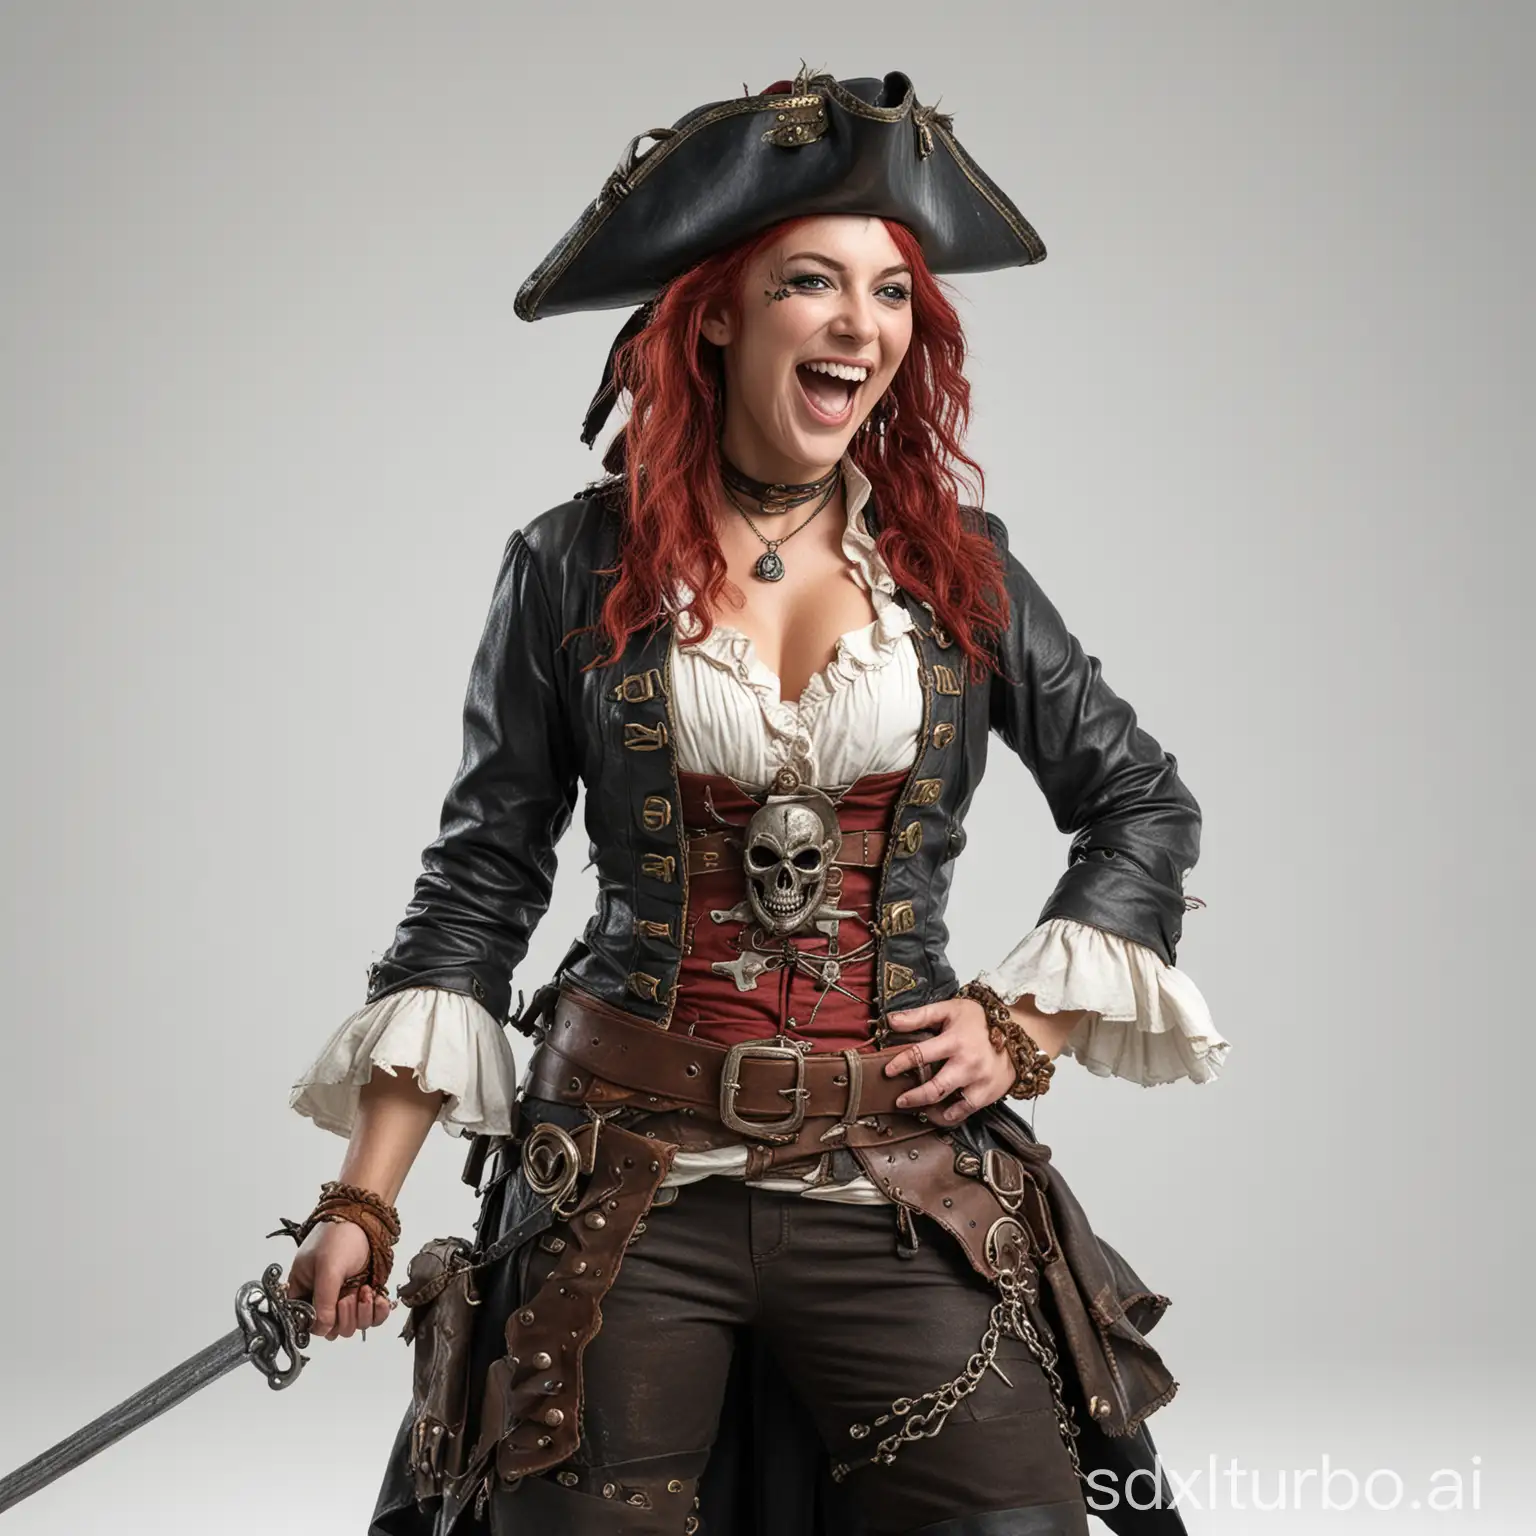 Swashbuckling laughing female Pirate Redd on a plain white background. This is a full body photo realistic high resolution image with sharp clean subject focus